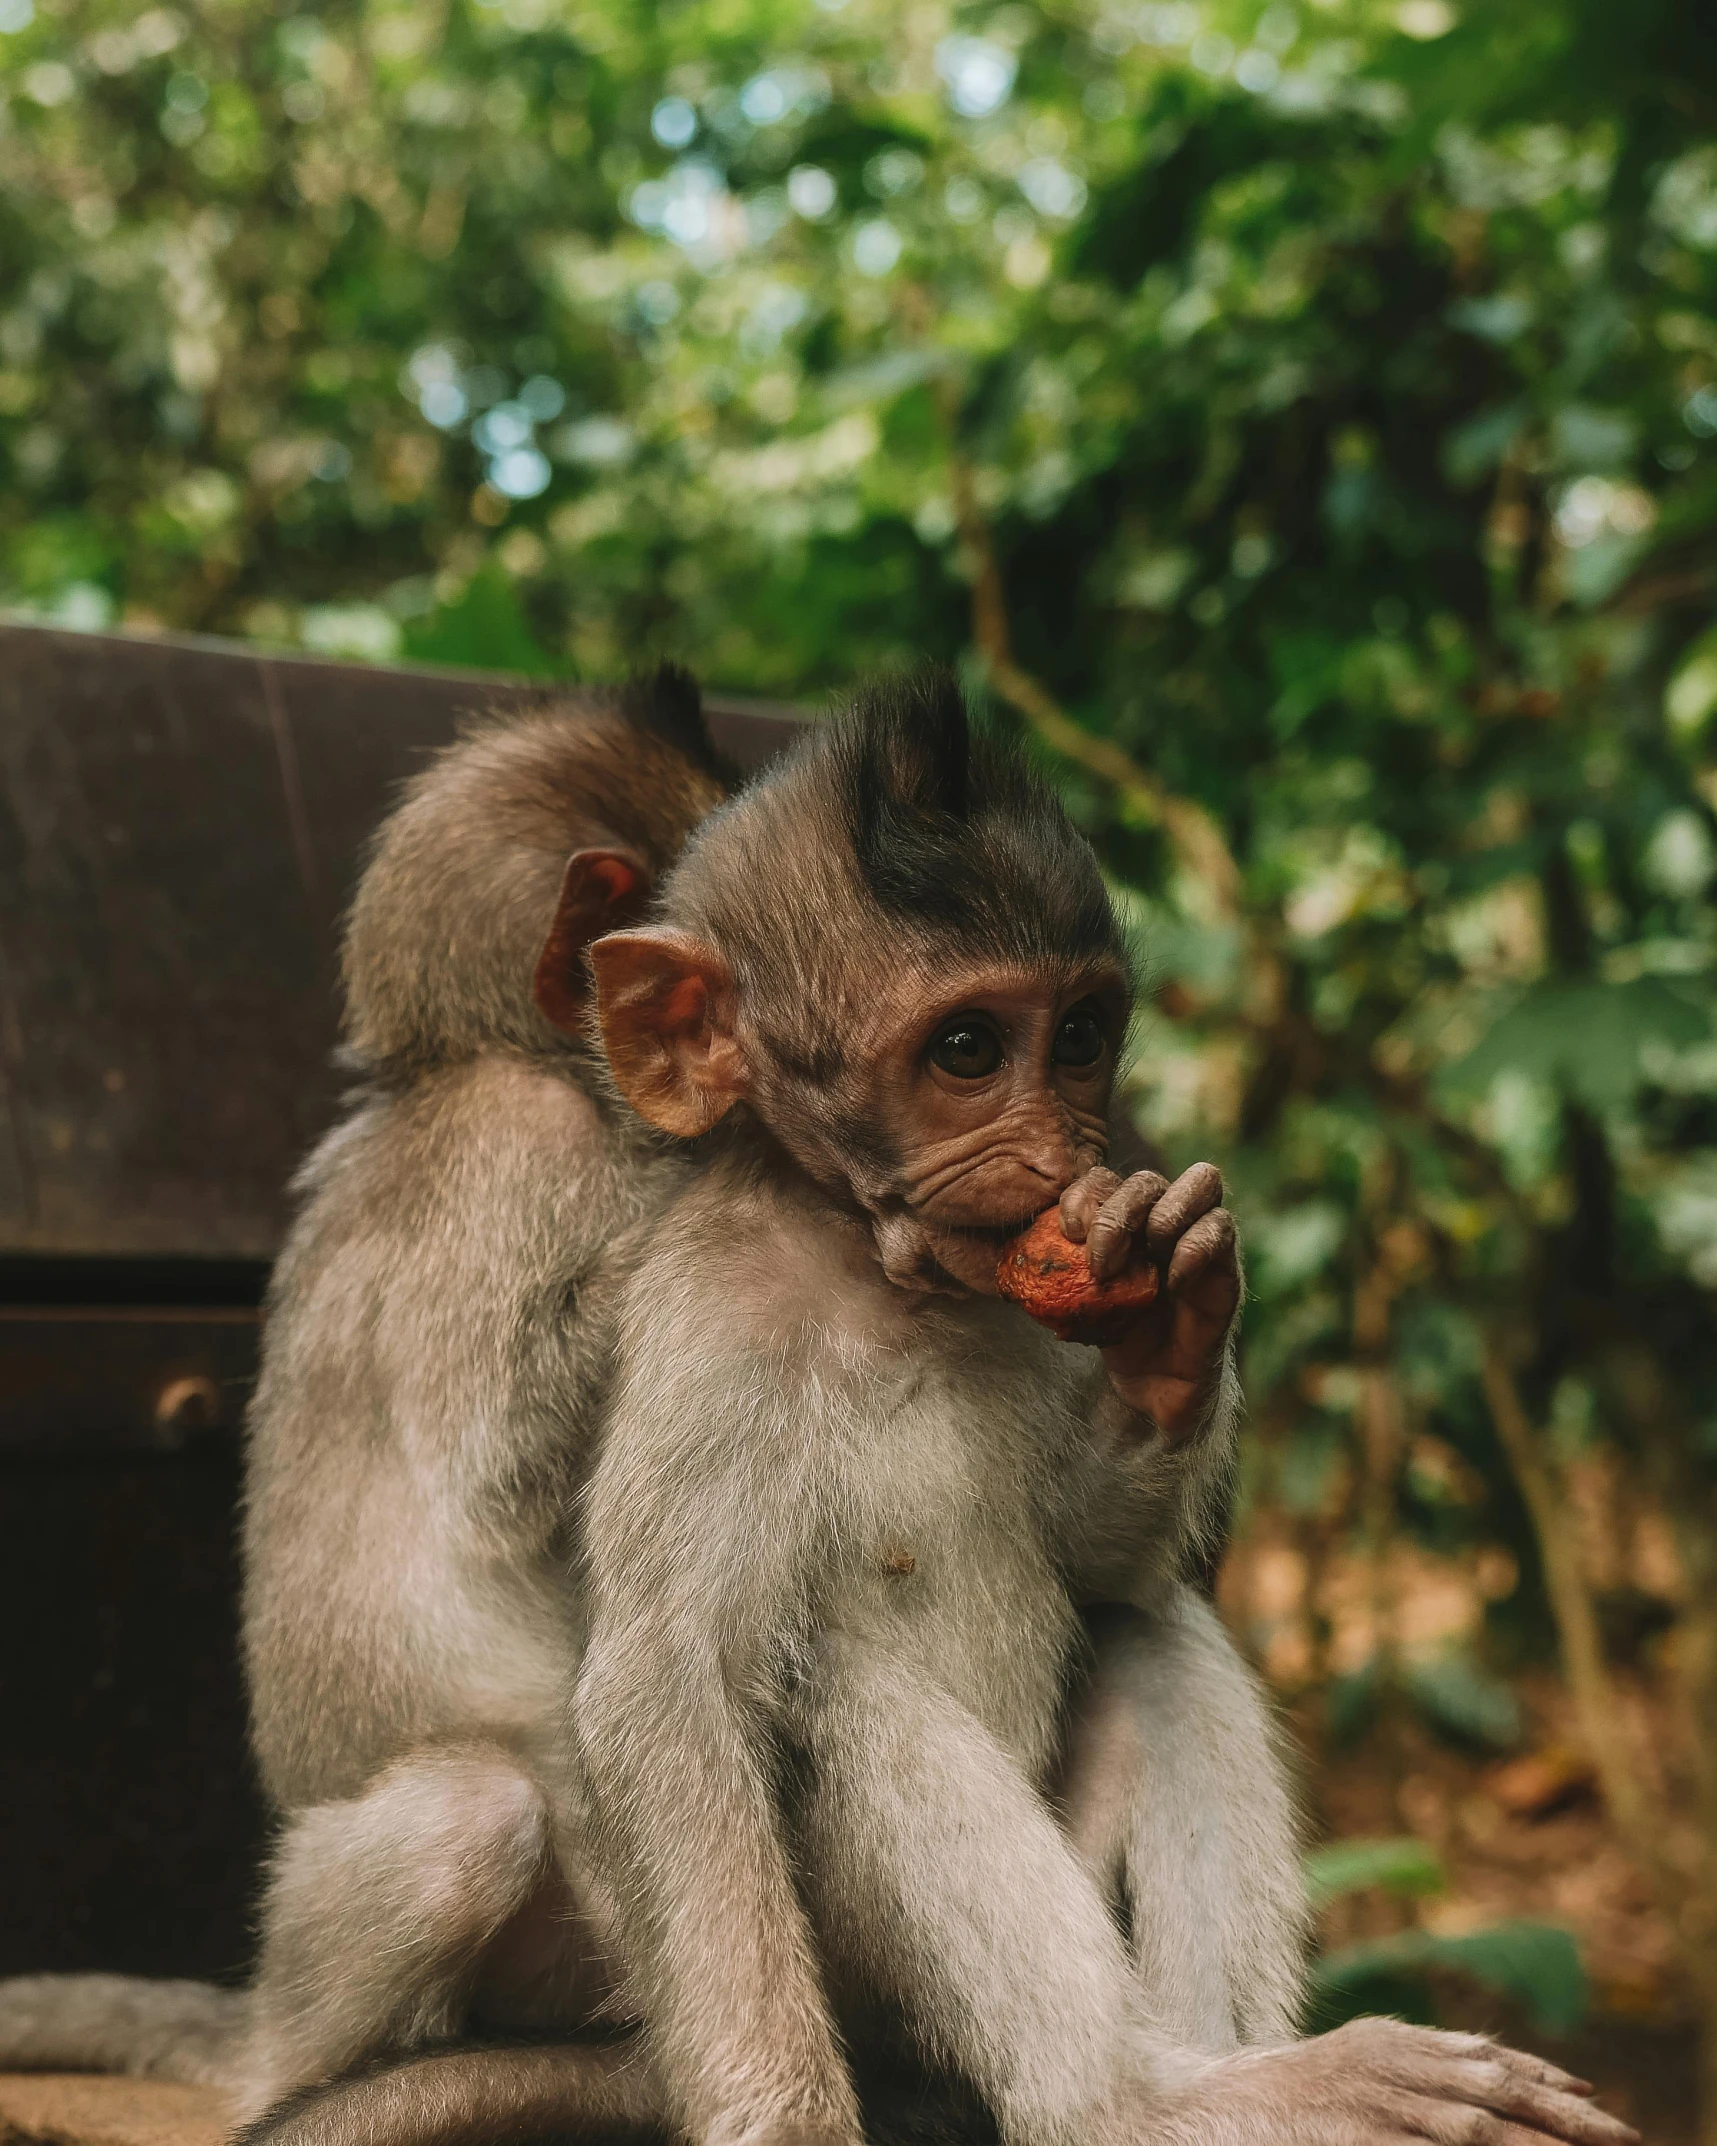 a monkey sitting on top of a wooden bench, sitting on a leaf, holding each other, ready to eat, top selection on unsplash